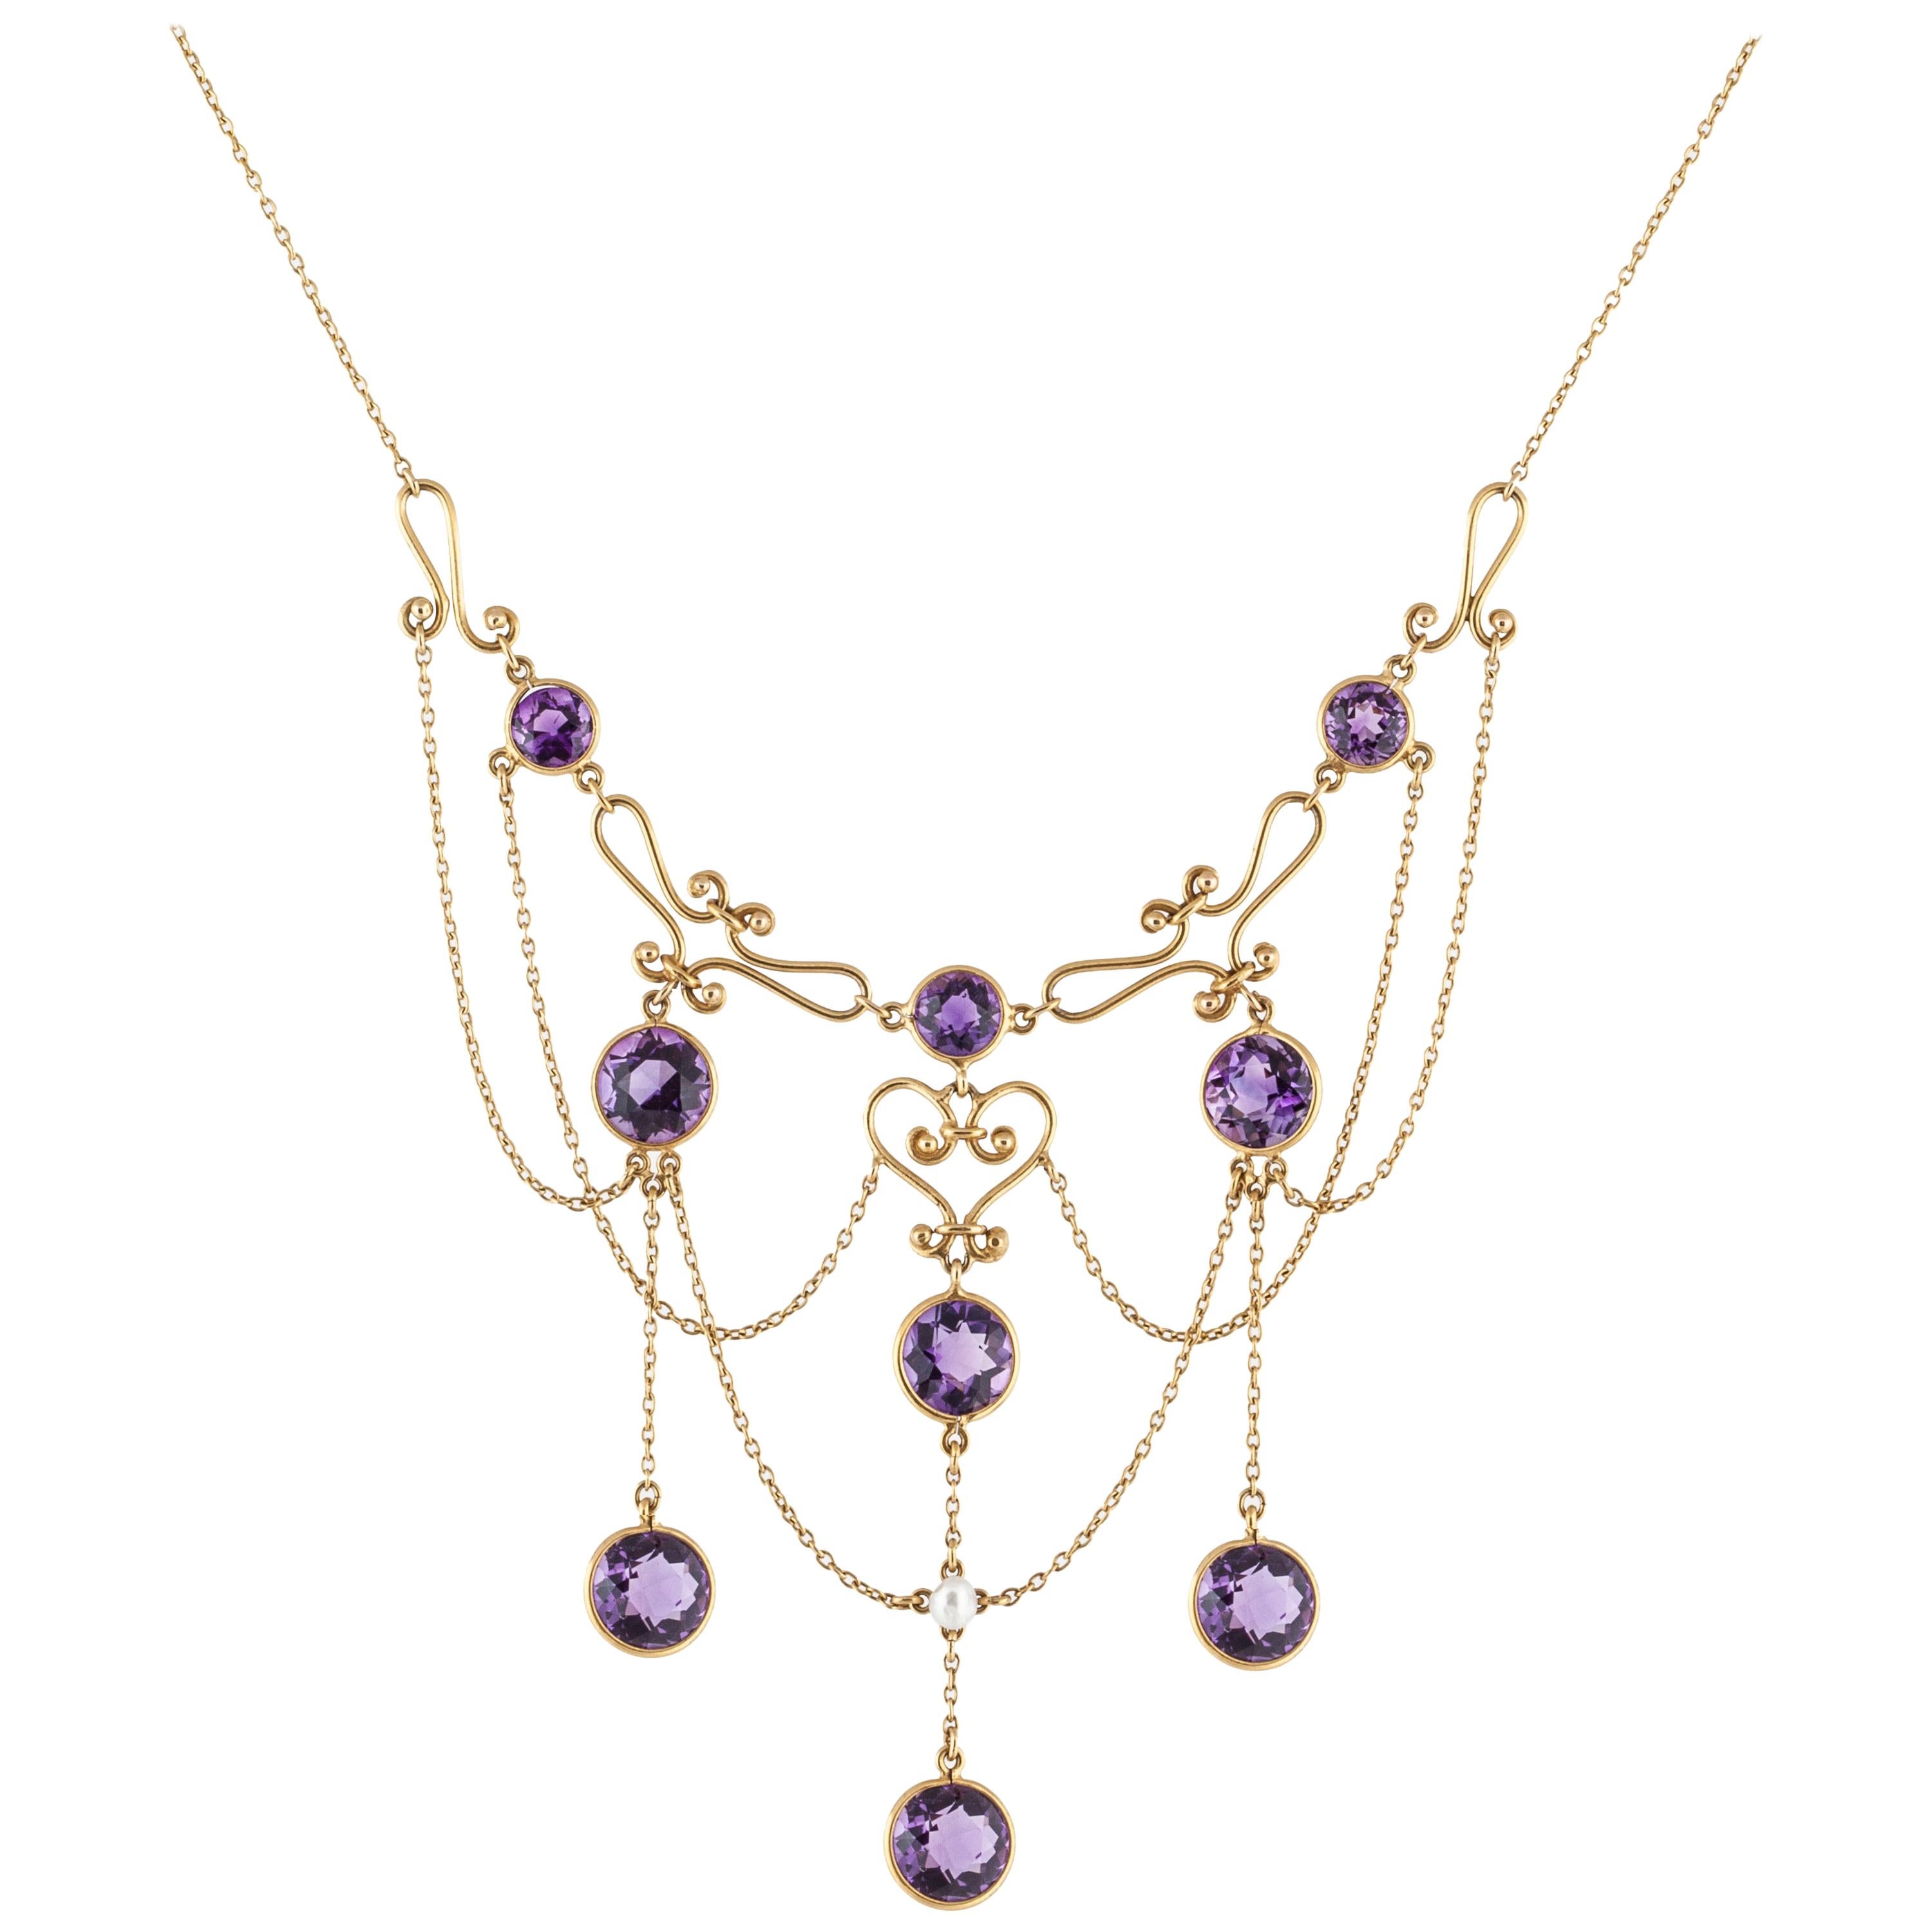 Late Victorian Amethyst Swag Necklace in 14K Gold